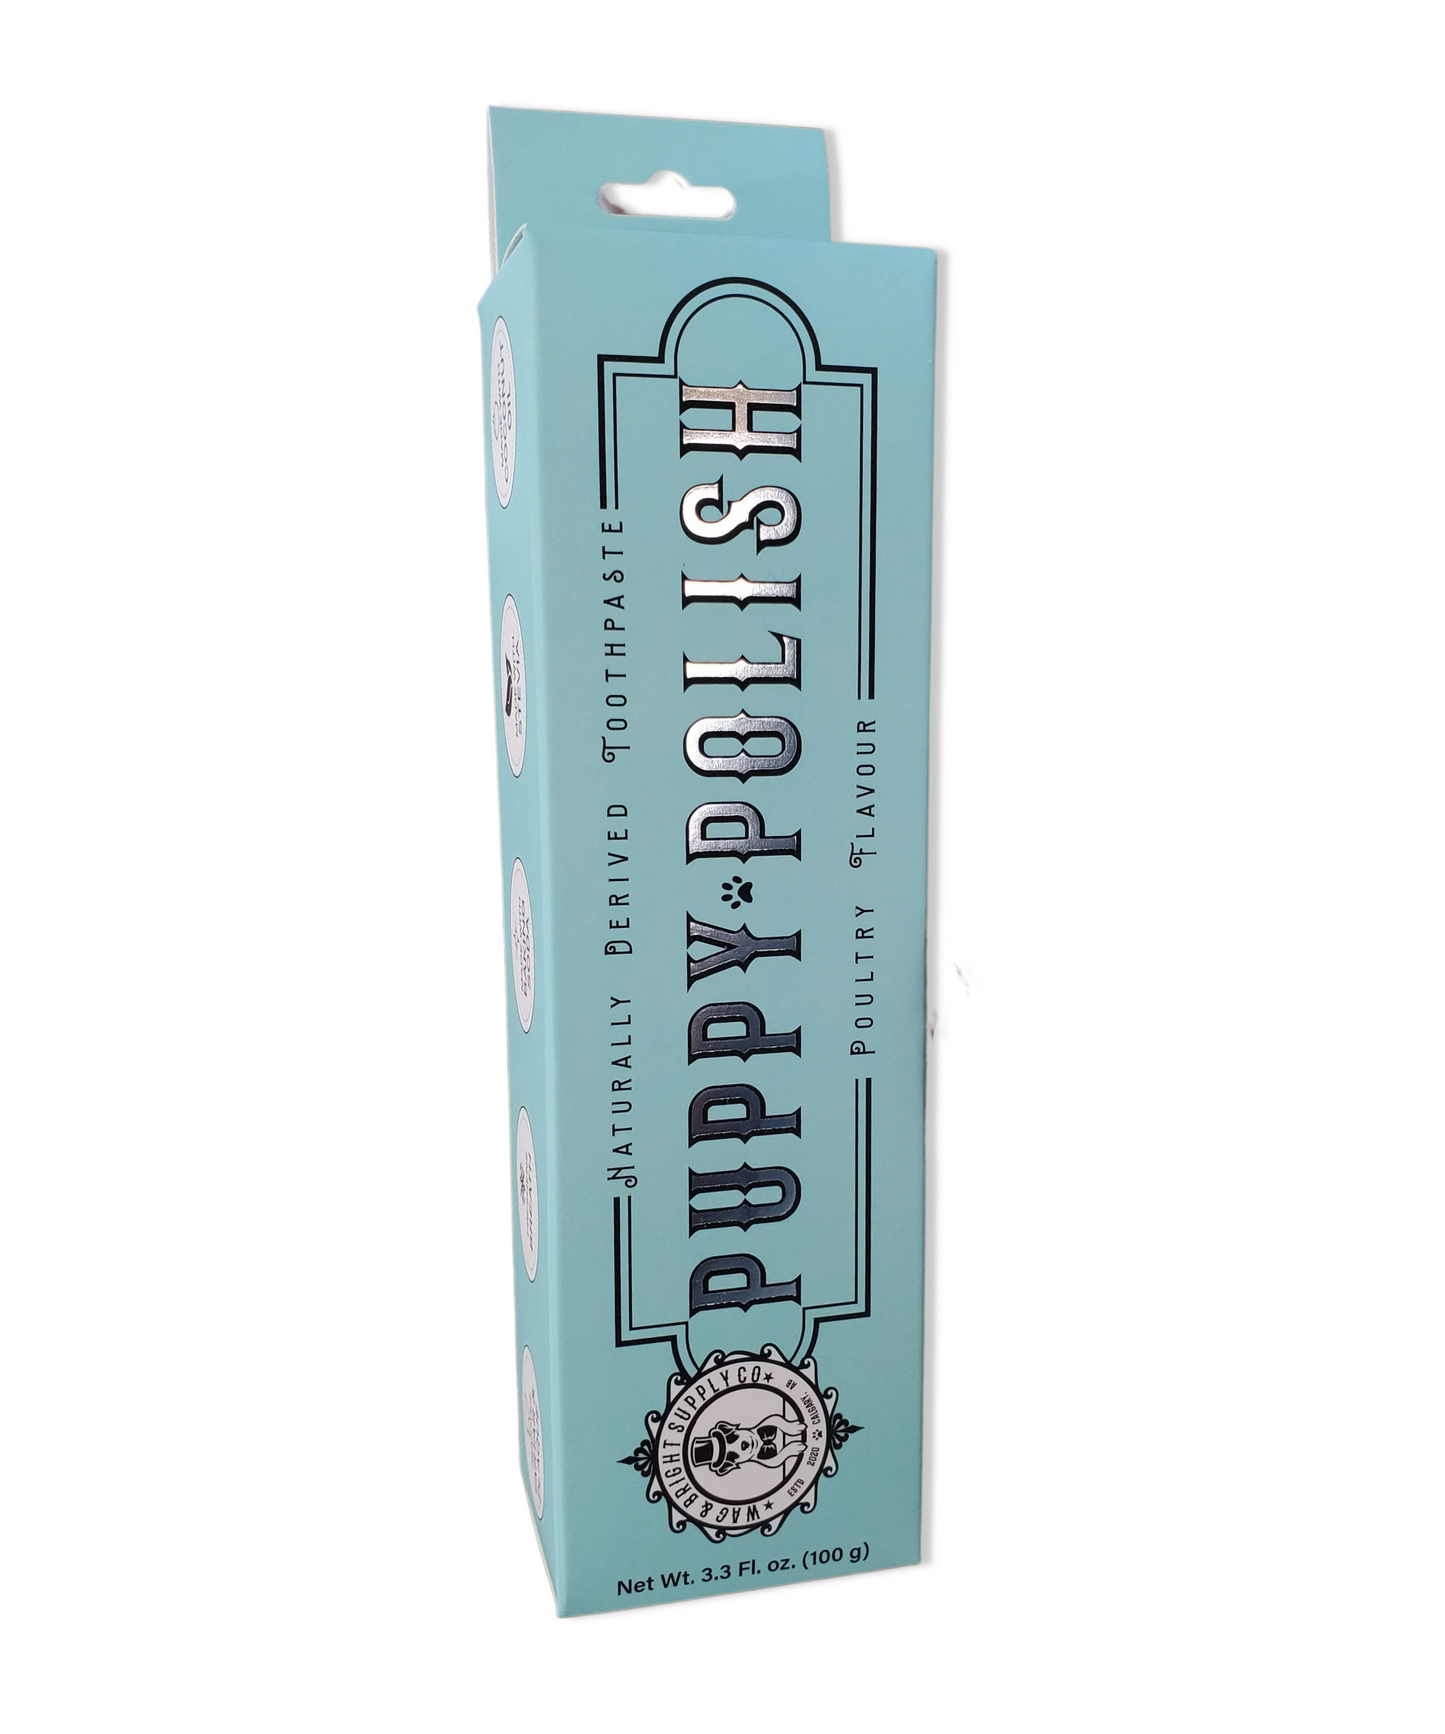 Puppy Polish Toothpaste - Poultry Flavor